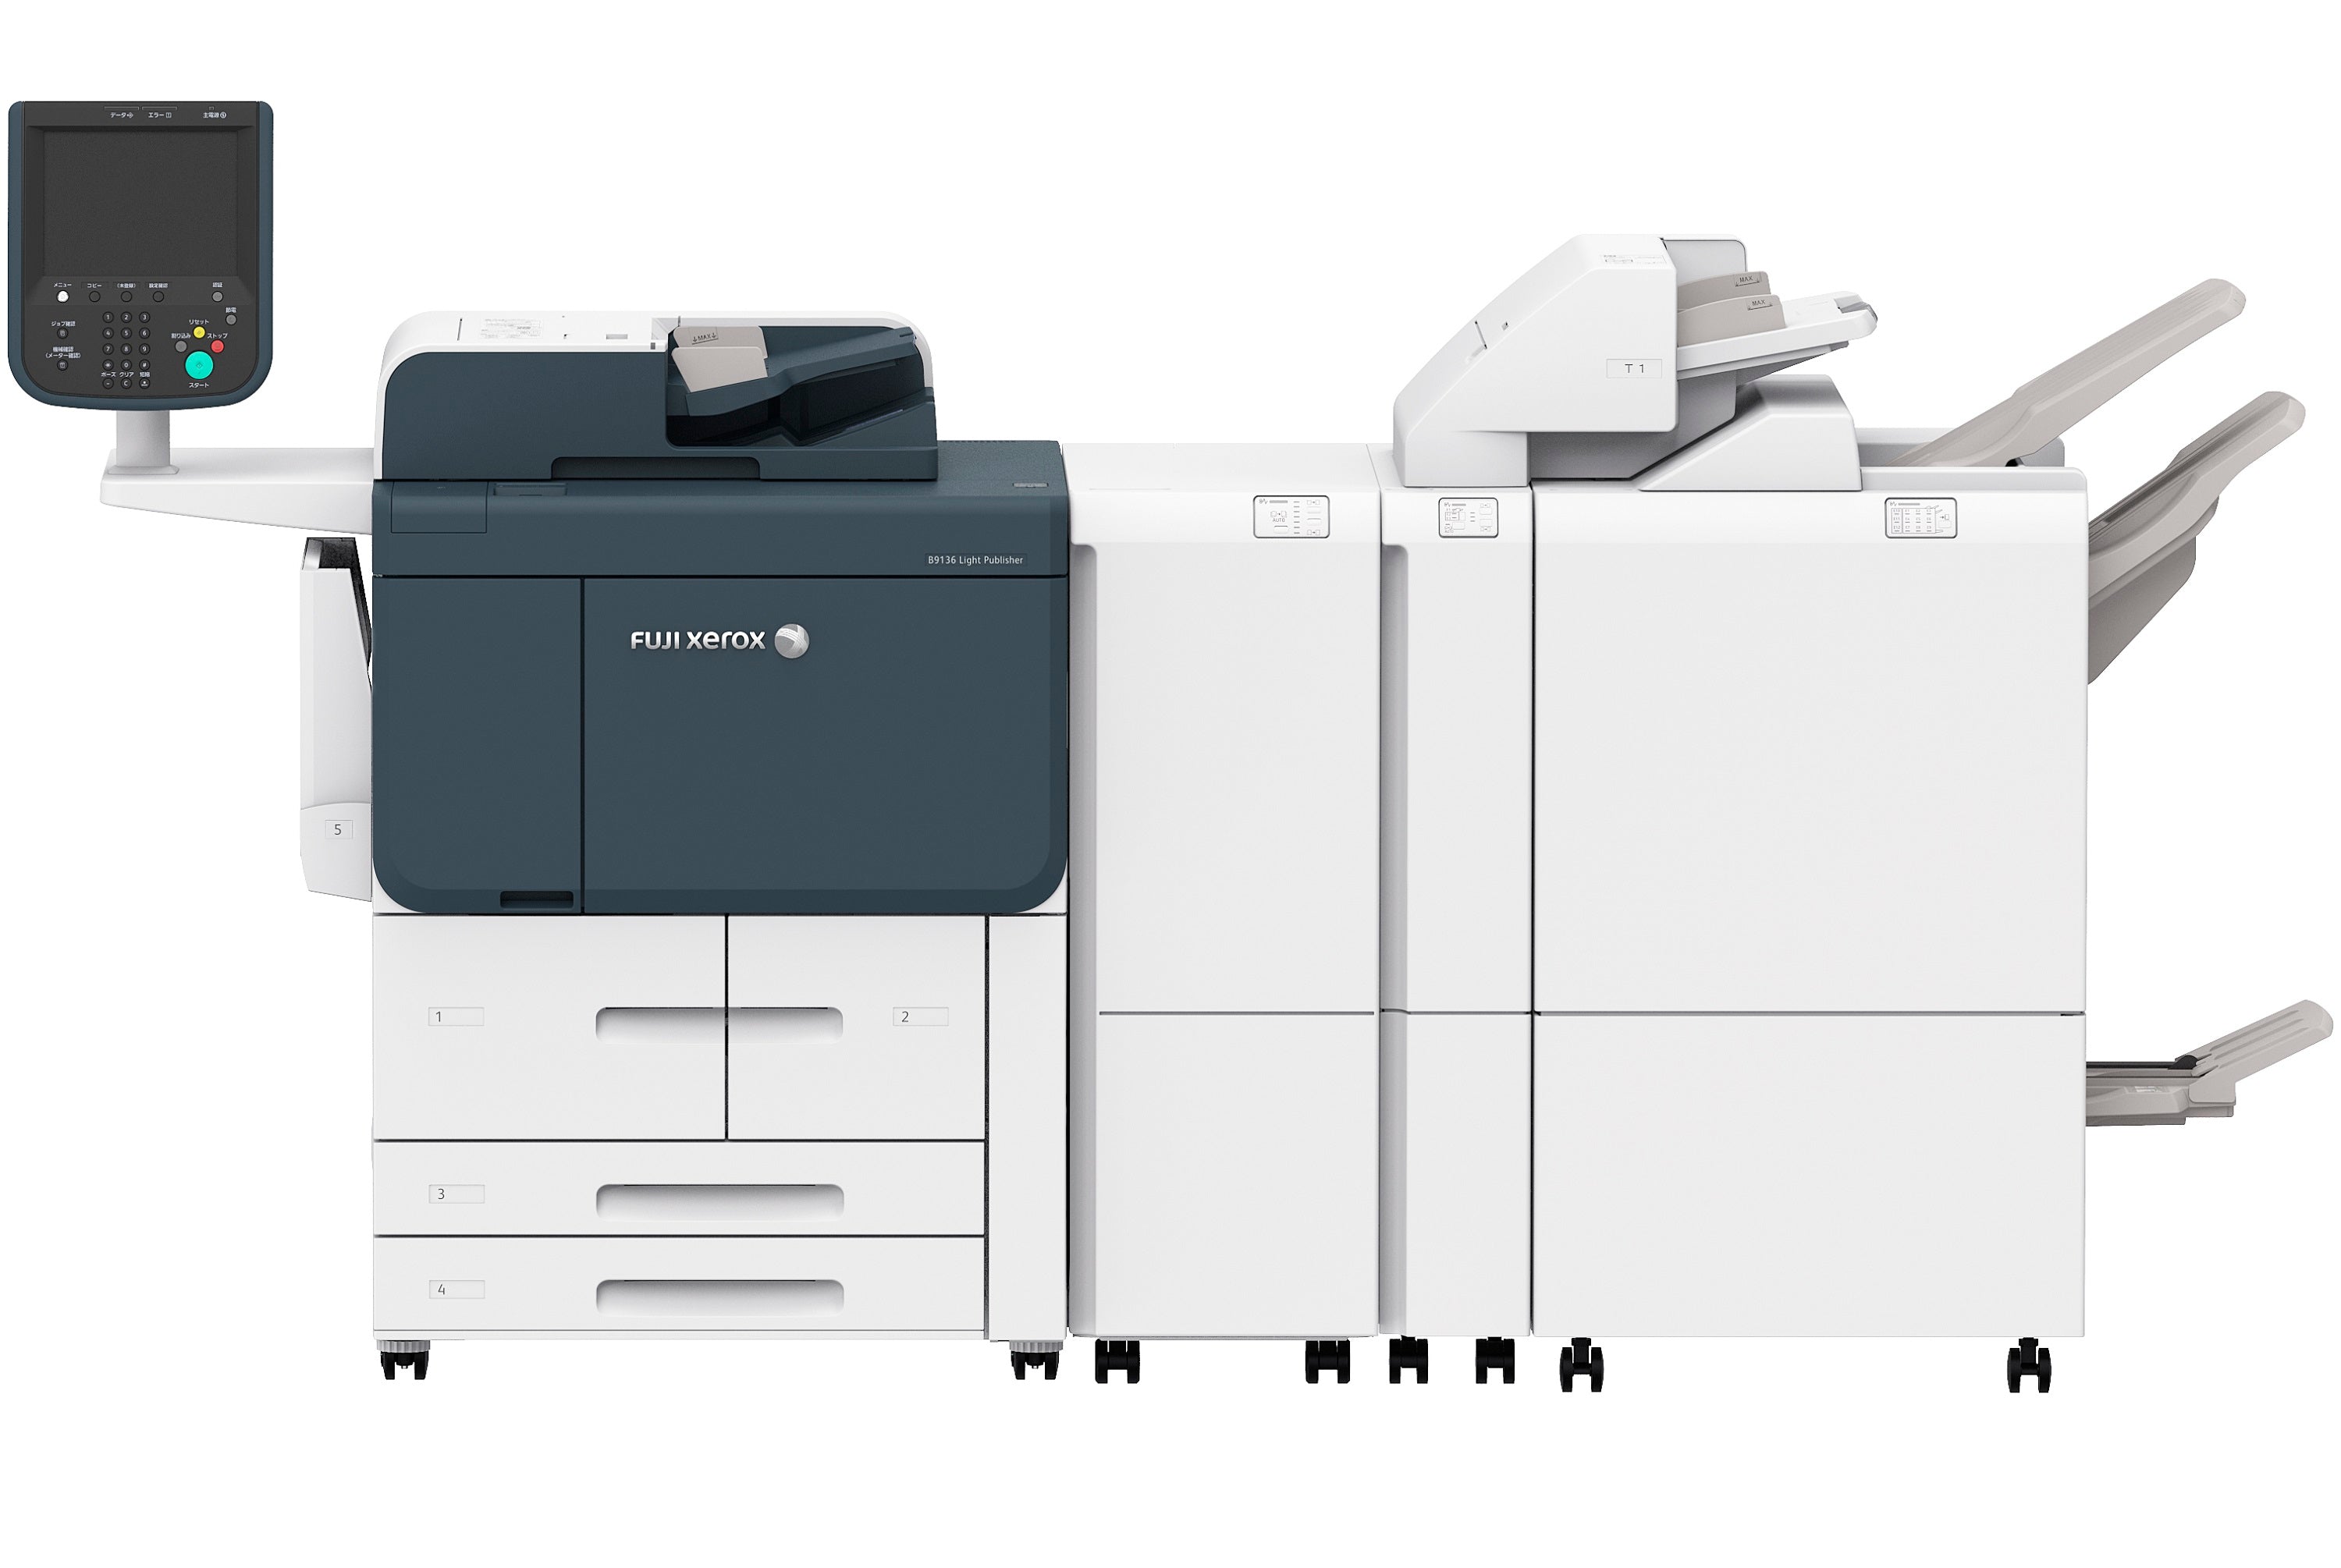 Xerox All-In-One PrimeLink B9136 136 PPM Black And White Copier/Printer With High Speed, Volume, And Resolution (2400 x 2400 Dpi) - Easy To Use Xerox Printer And Better for Your Business